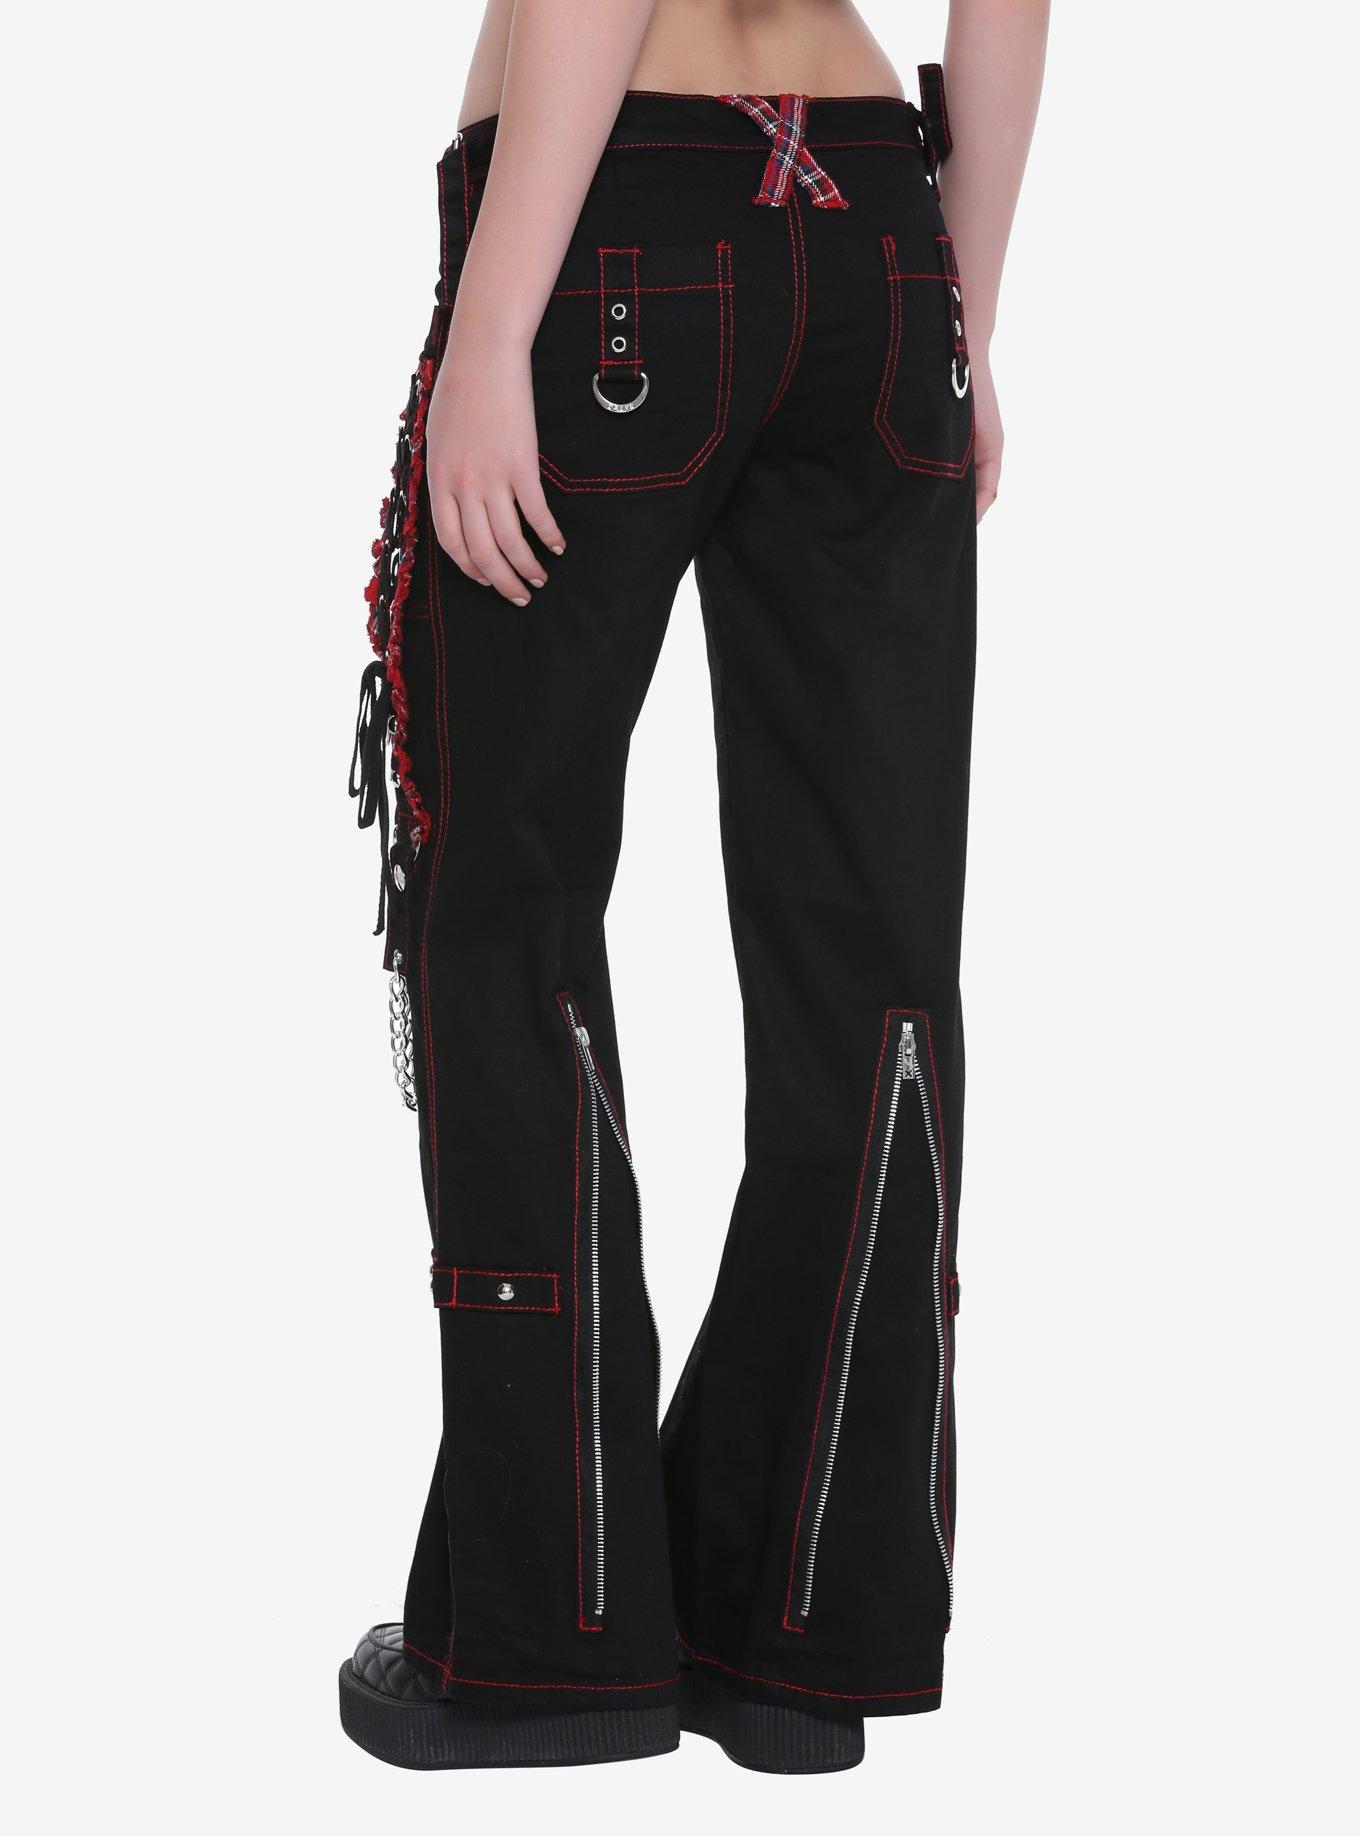 Tripp Black And Red Plaid Lace-Up Chain Pants, , alternate